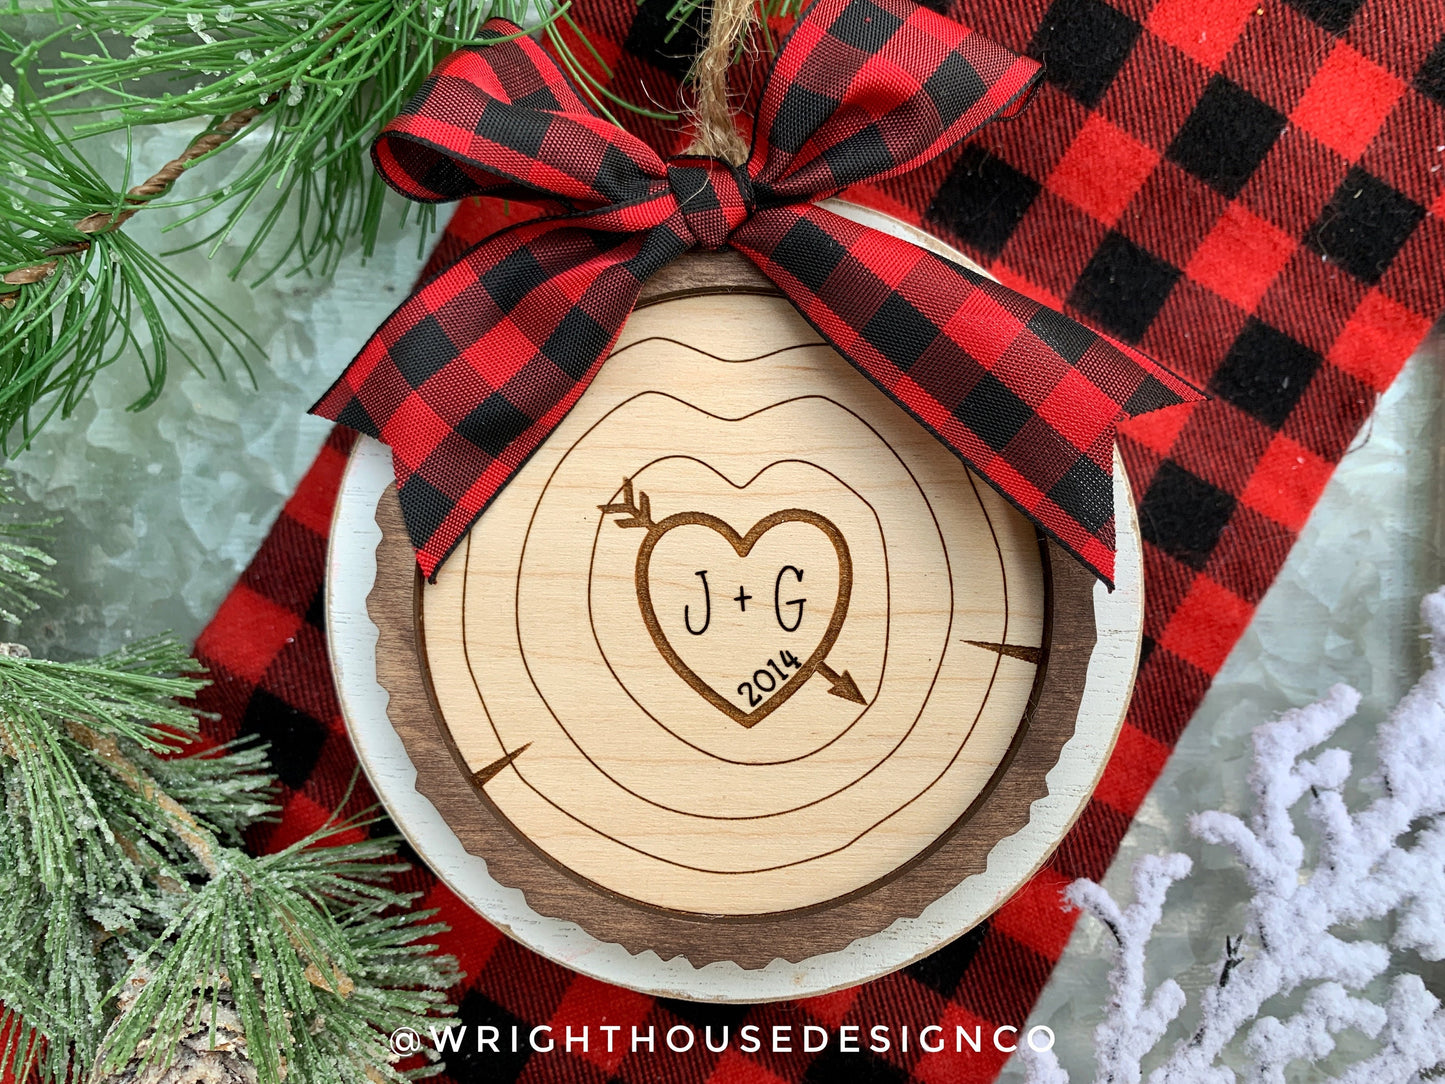 Couples Carved Initials - Wood Slice Ornaments - Rustic Farmhouse Christmas Decor - Tree Cookies - Buffalo Plaid Bows - Wooden Stocking Tags